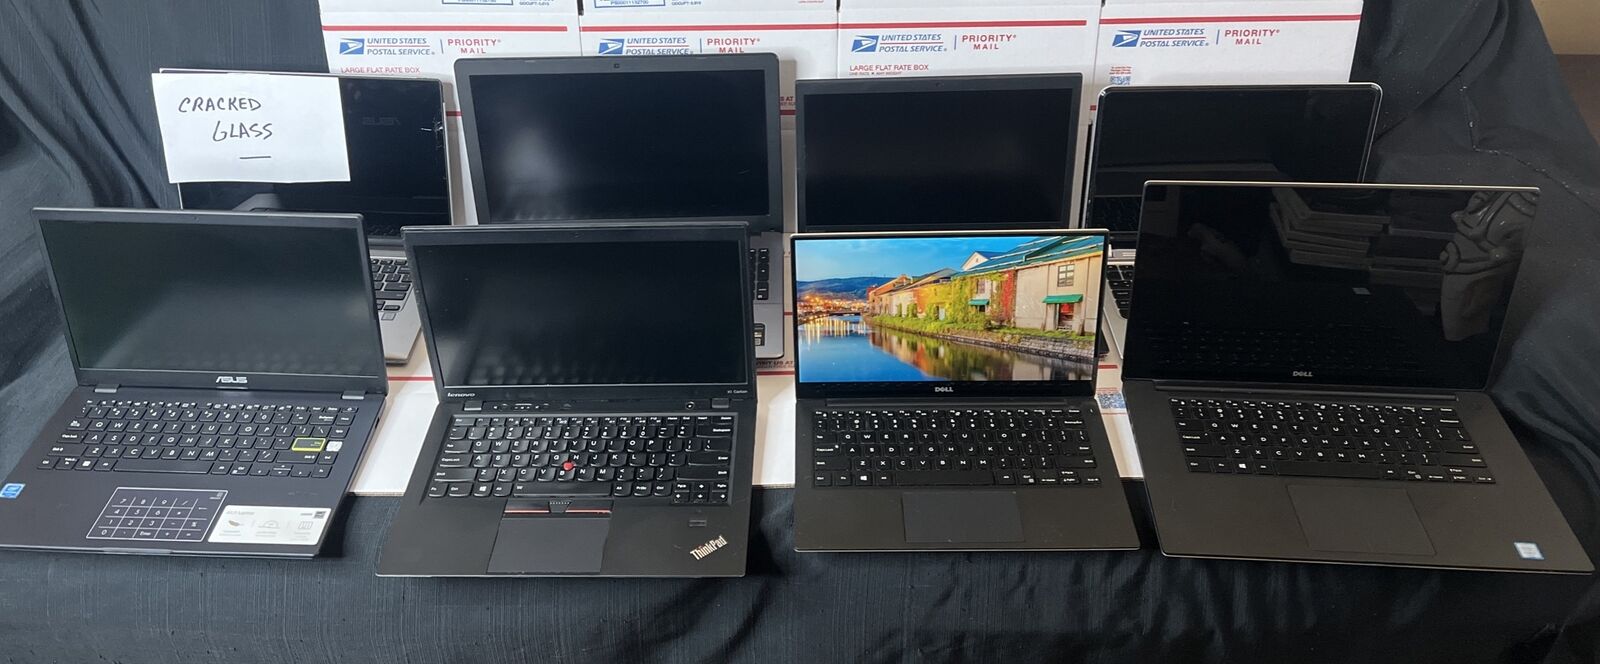 Lot of 8 ASSORTED Laptops- Asus, DELL,Lenovo X1 -i7.i5,Intel AMD -AS IS/UNTESTED